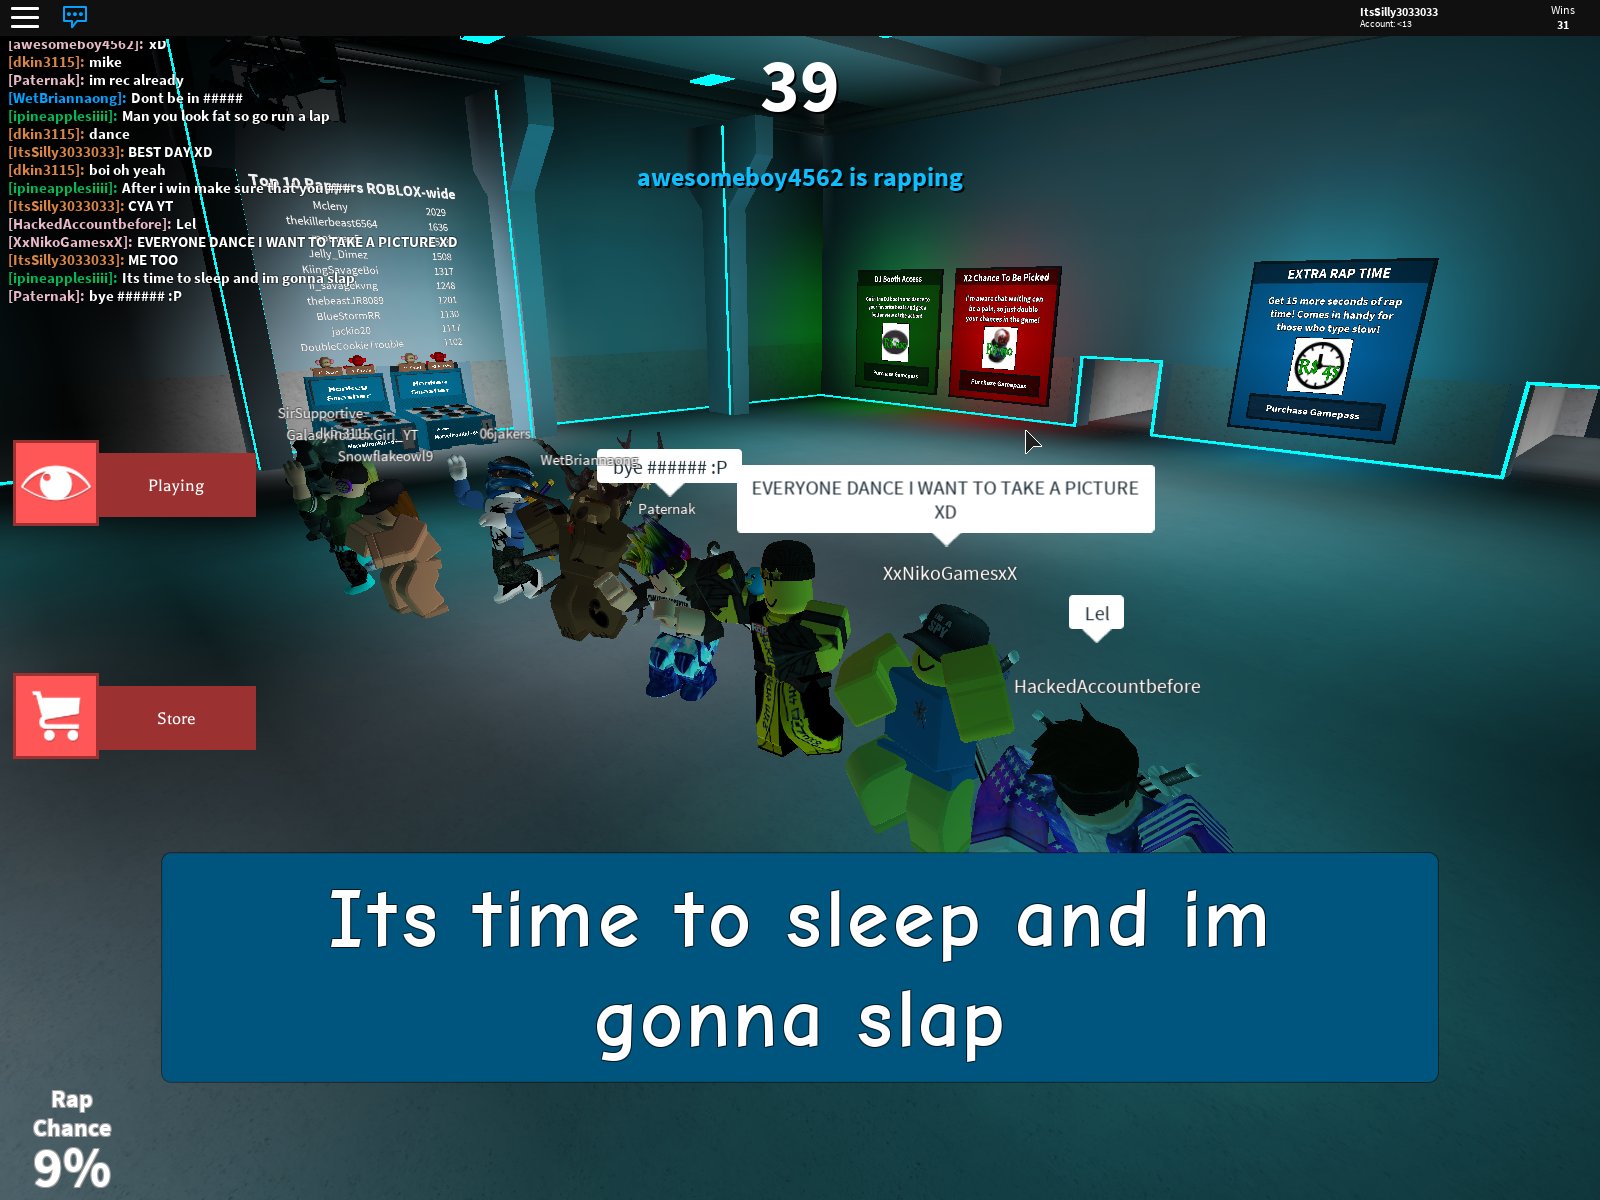 Itssilly3033033 On Twitter Dance Party Amazing Game Auto Rap Battles 2 Lol You Think It S A Club Nope It S A Rap Battles 2 - best things to say in roblox rap battle